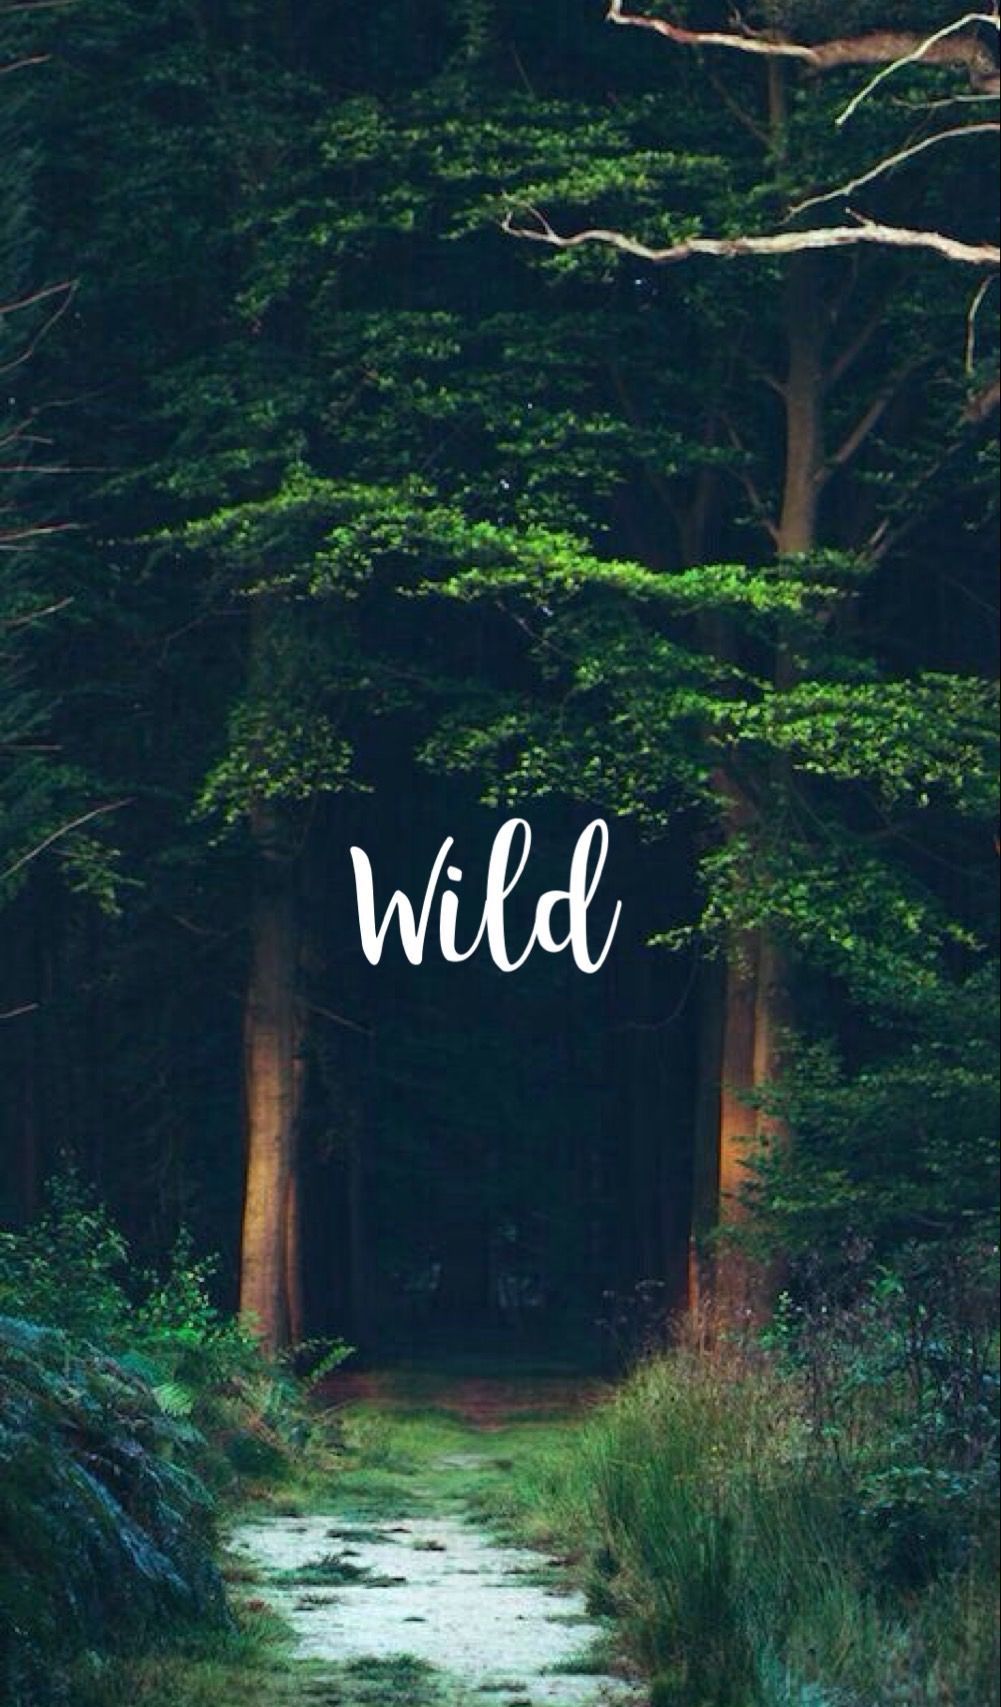 Step out into the wild today, its fabulous for the mind, body